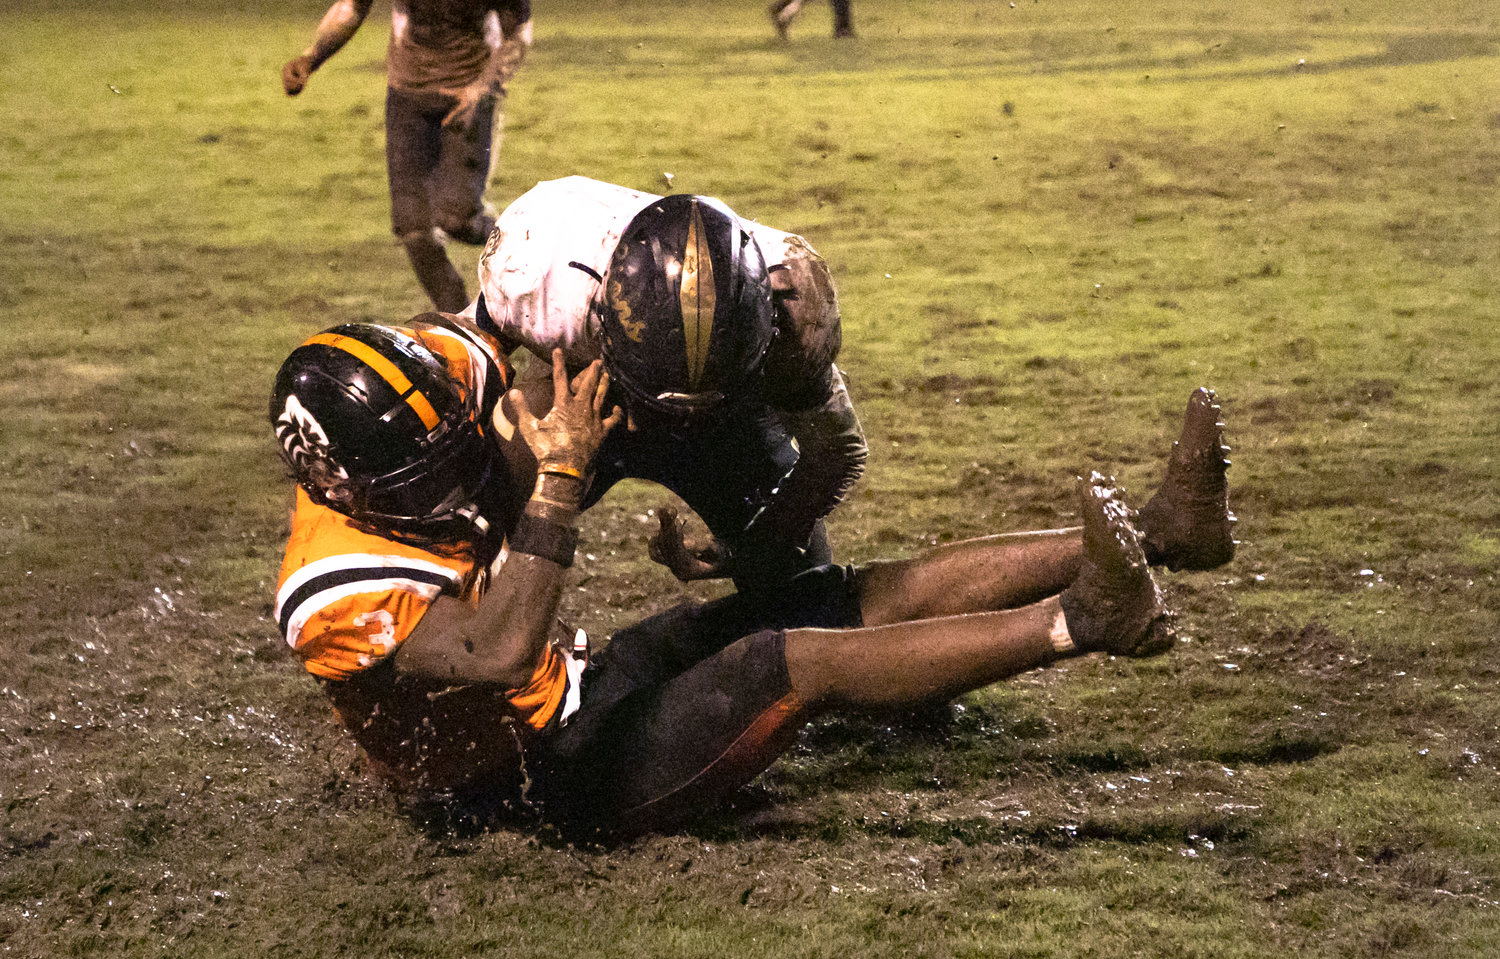 Baldwin County senior Ky McNulty secures a catch in the mud during the Tigers’ non-region game against the Foley Lions Aug. 26 at Lyle Underwood Stadium in Bay Minette. McNulty announced his commitment to the Troy Trojans football program before the season.